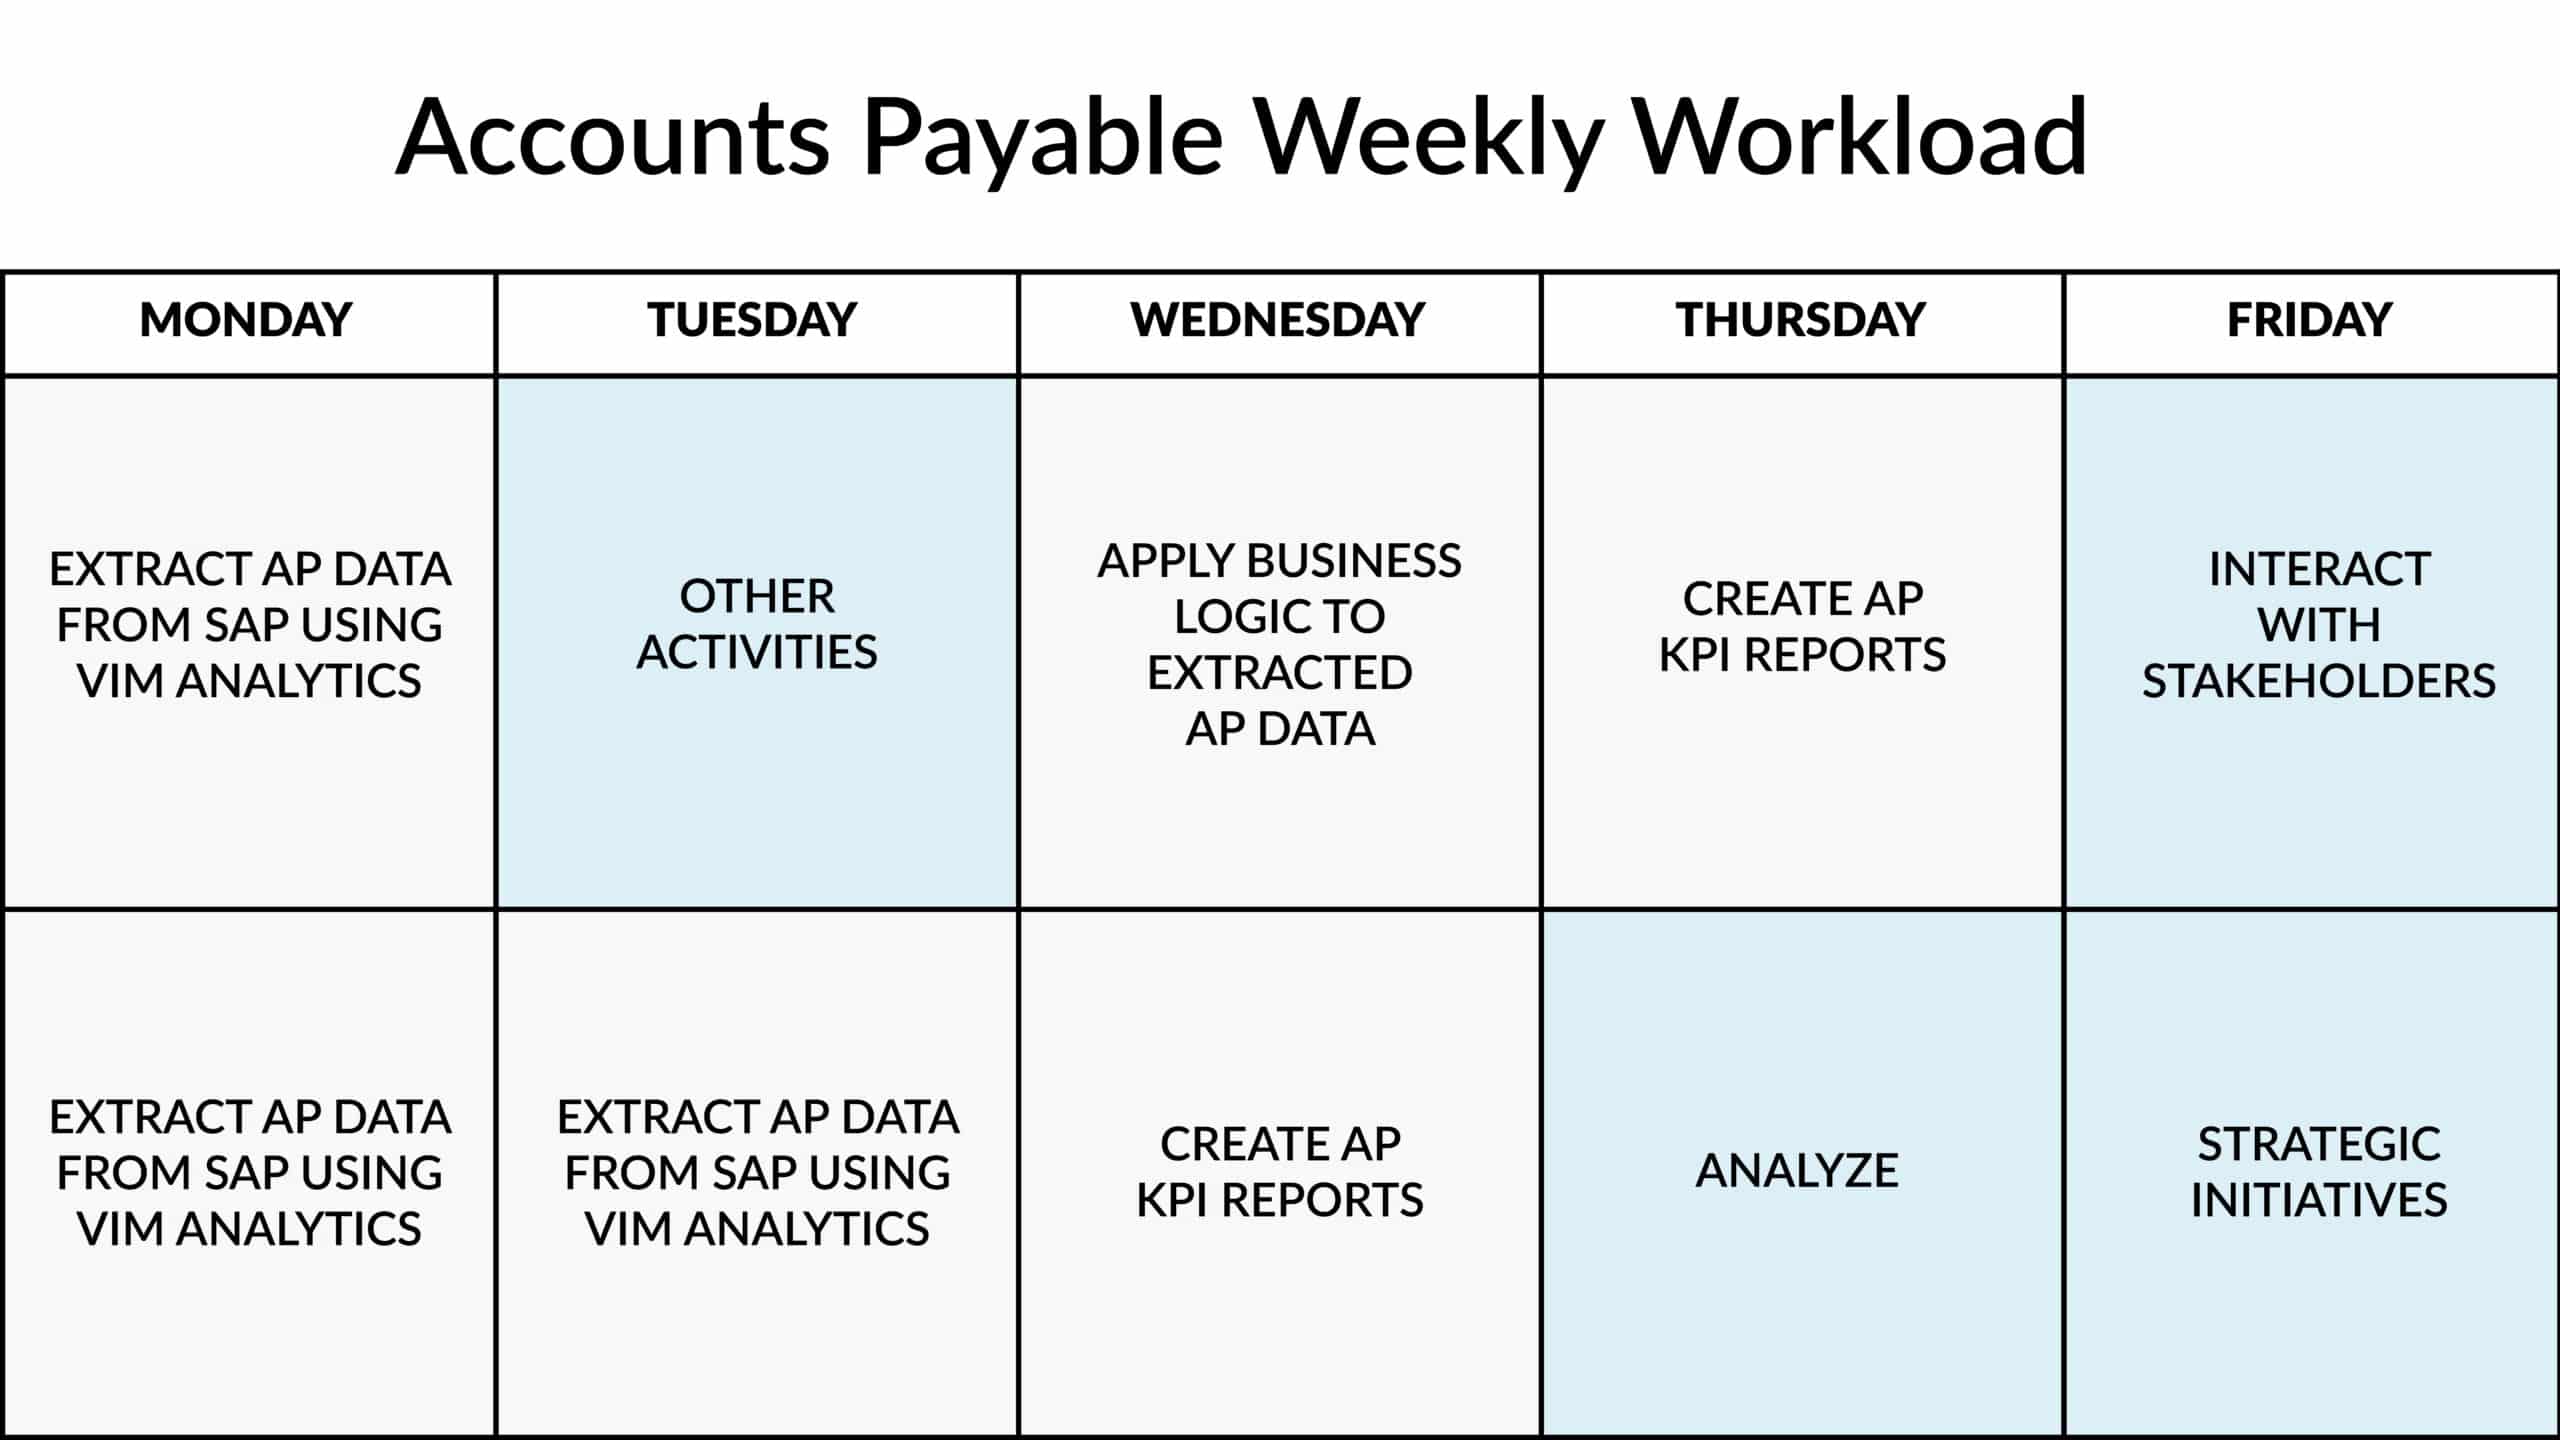 AP workload before insights and analytics